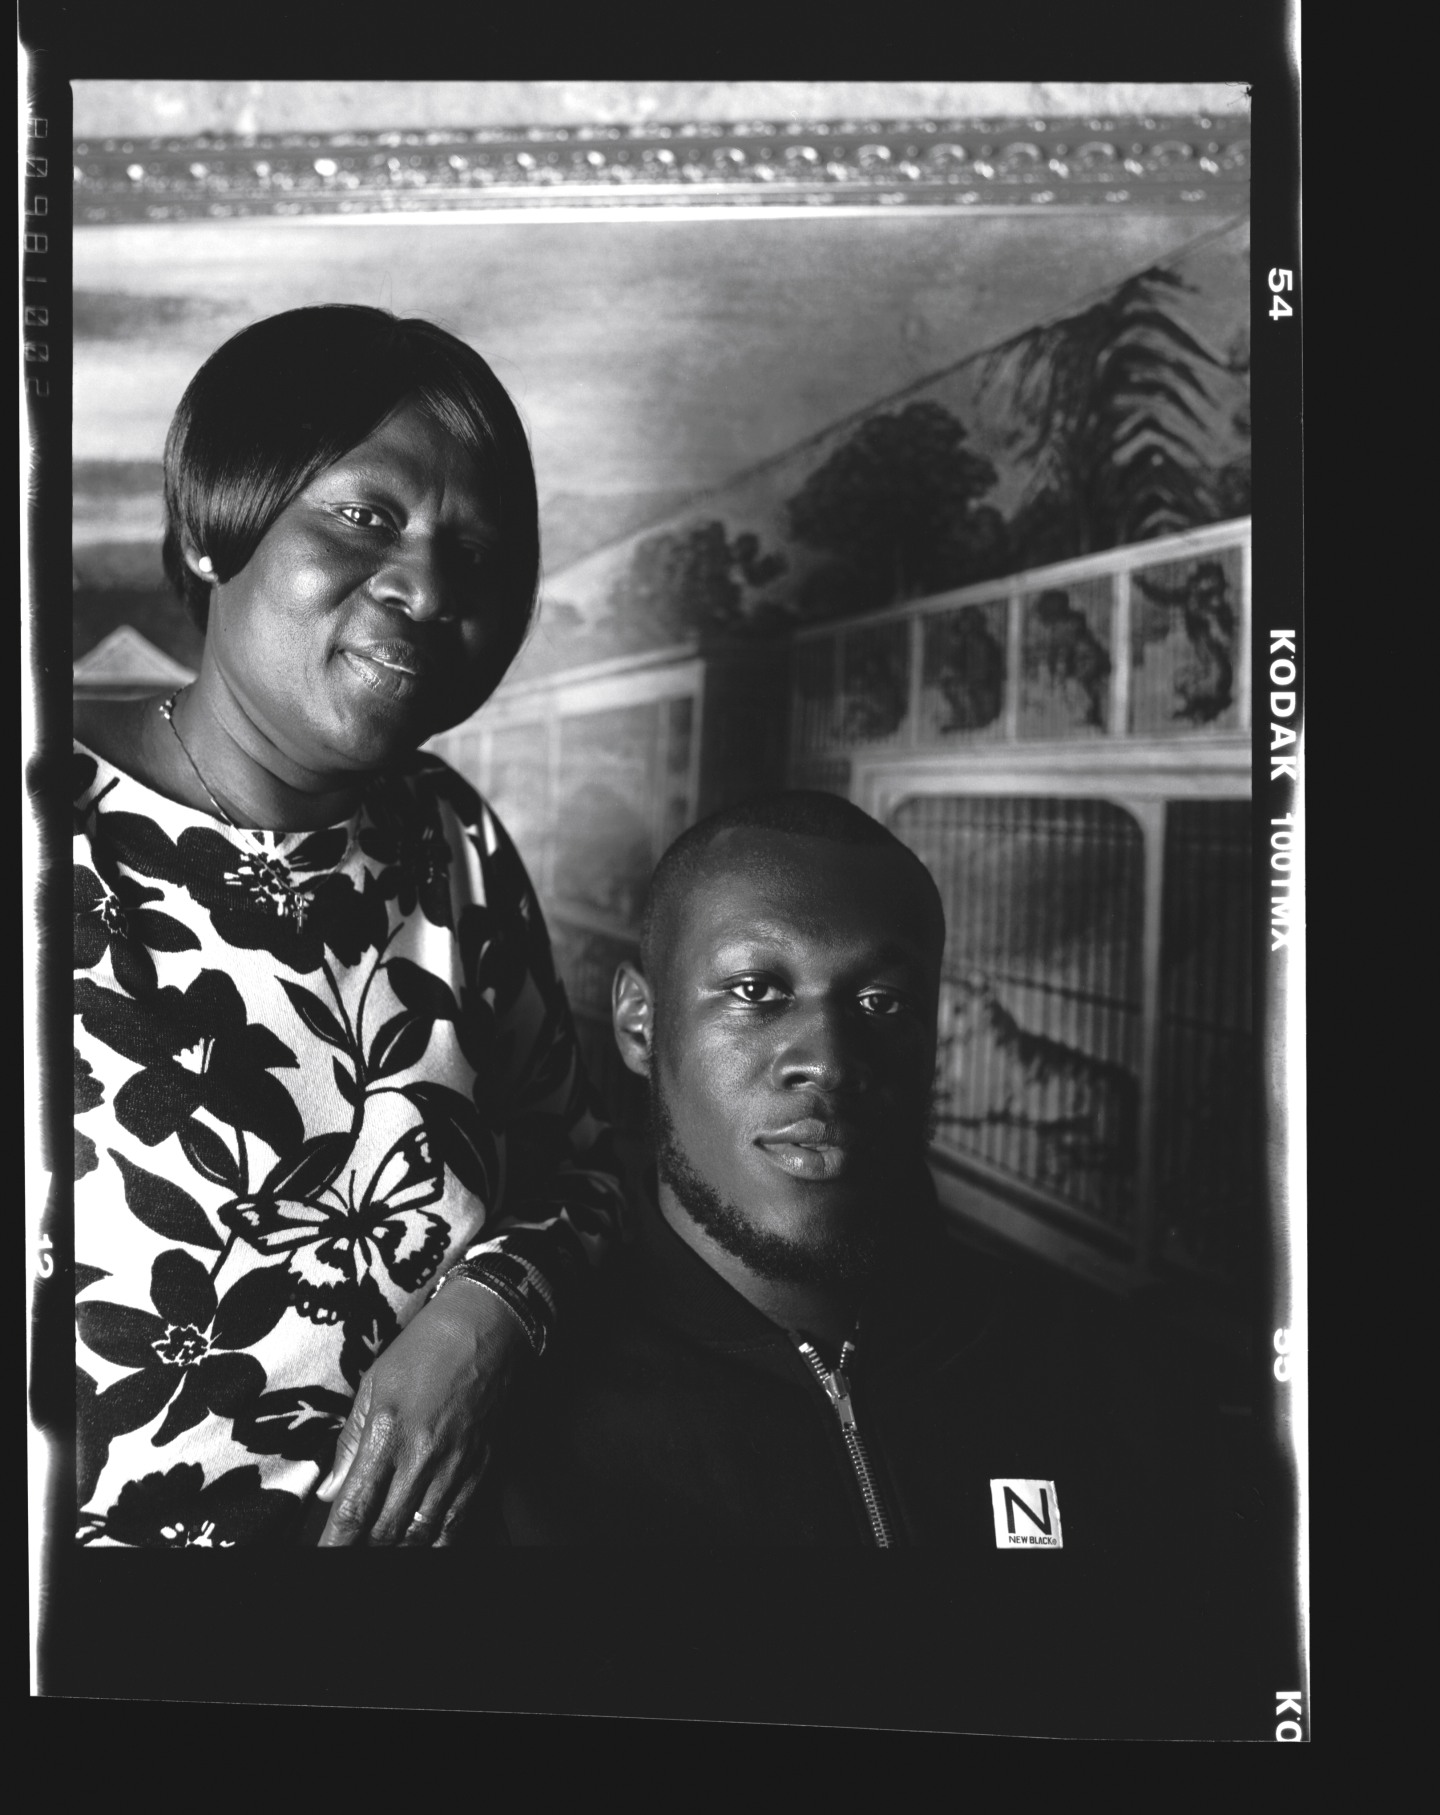 Stormzy’s Mom Breaks Down The Personal Secrets Behind Her Son’s Public Success